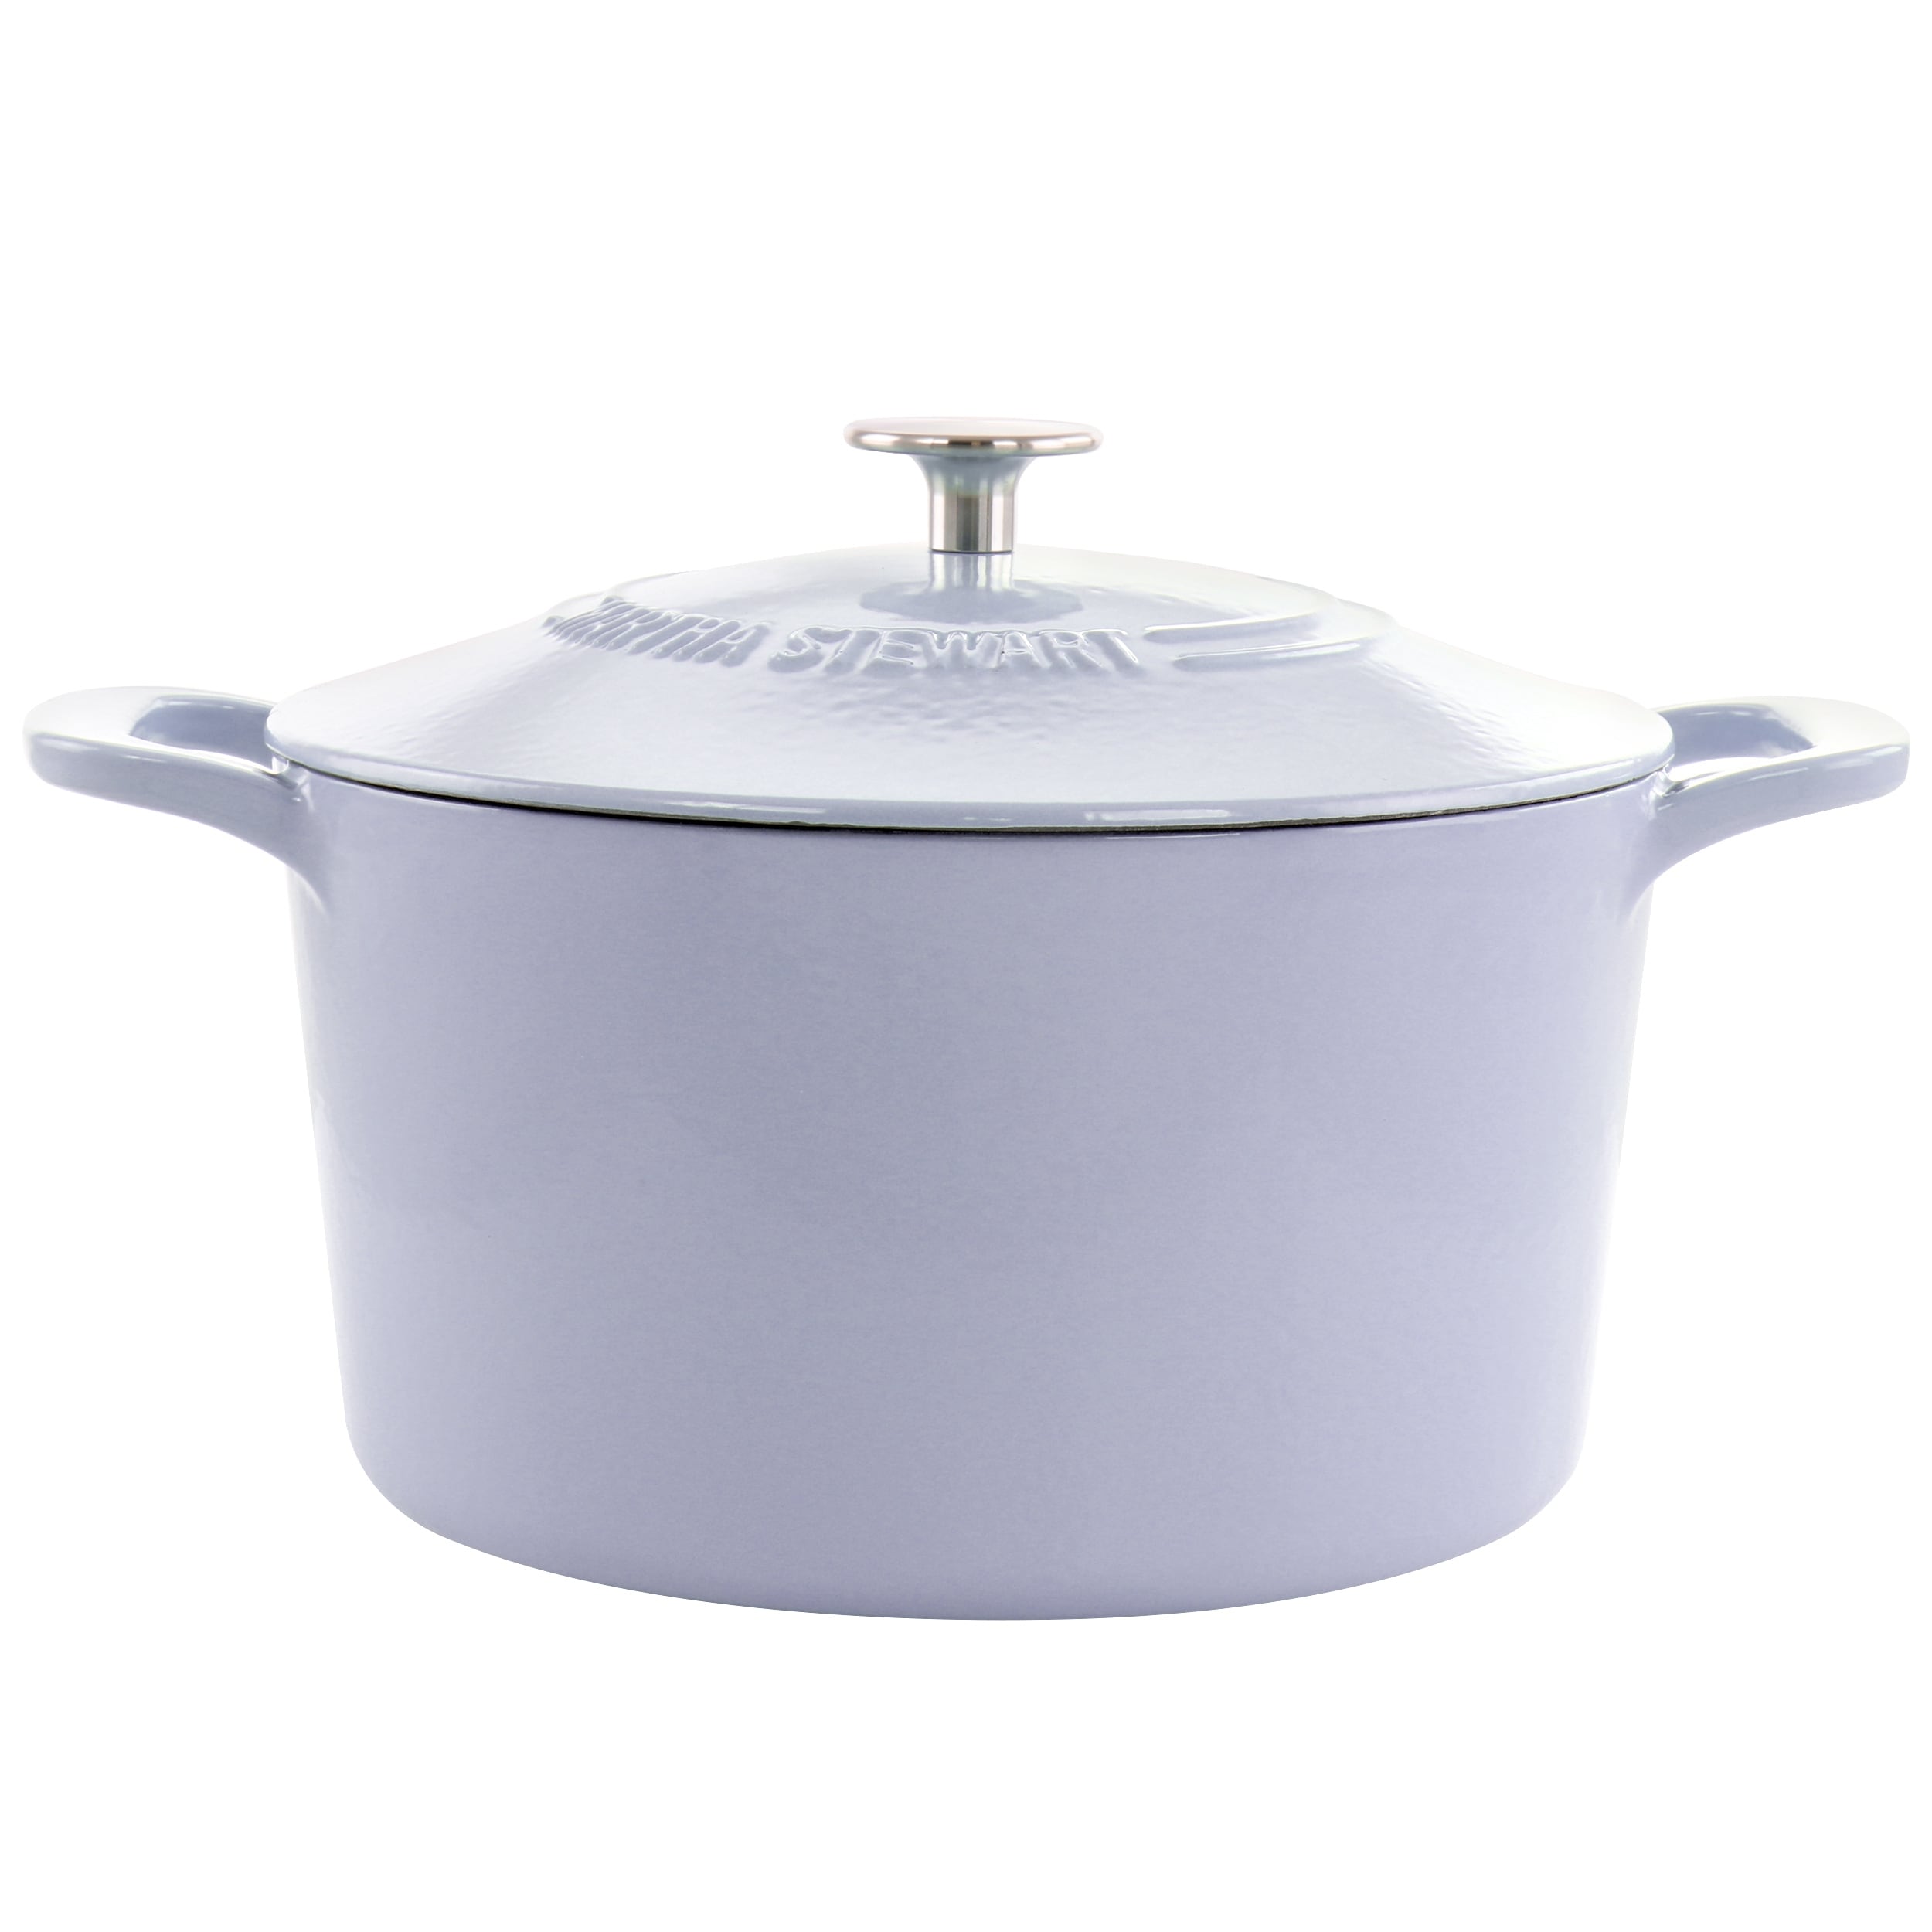 MARTHA STEWART 7-qt. Enameled Cast Iron Dutch Oven with Lid in